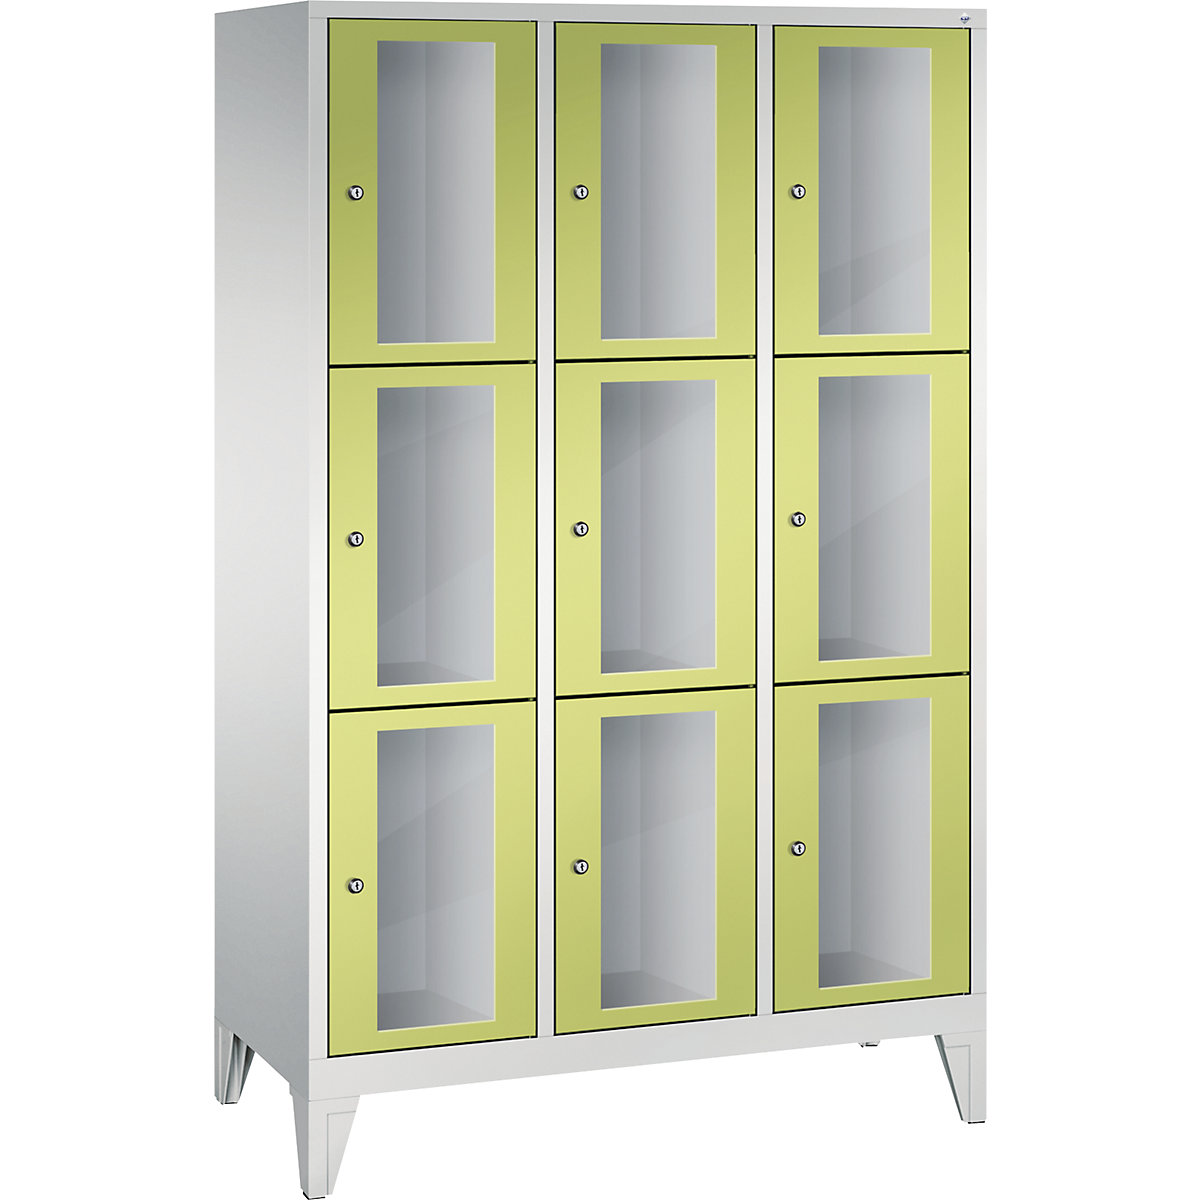 CLASSIC locker unit, compartment height 510 mm, with feet – C+P, 9 compartments, width 1200 mm, viridian green door-6